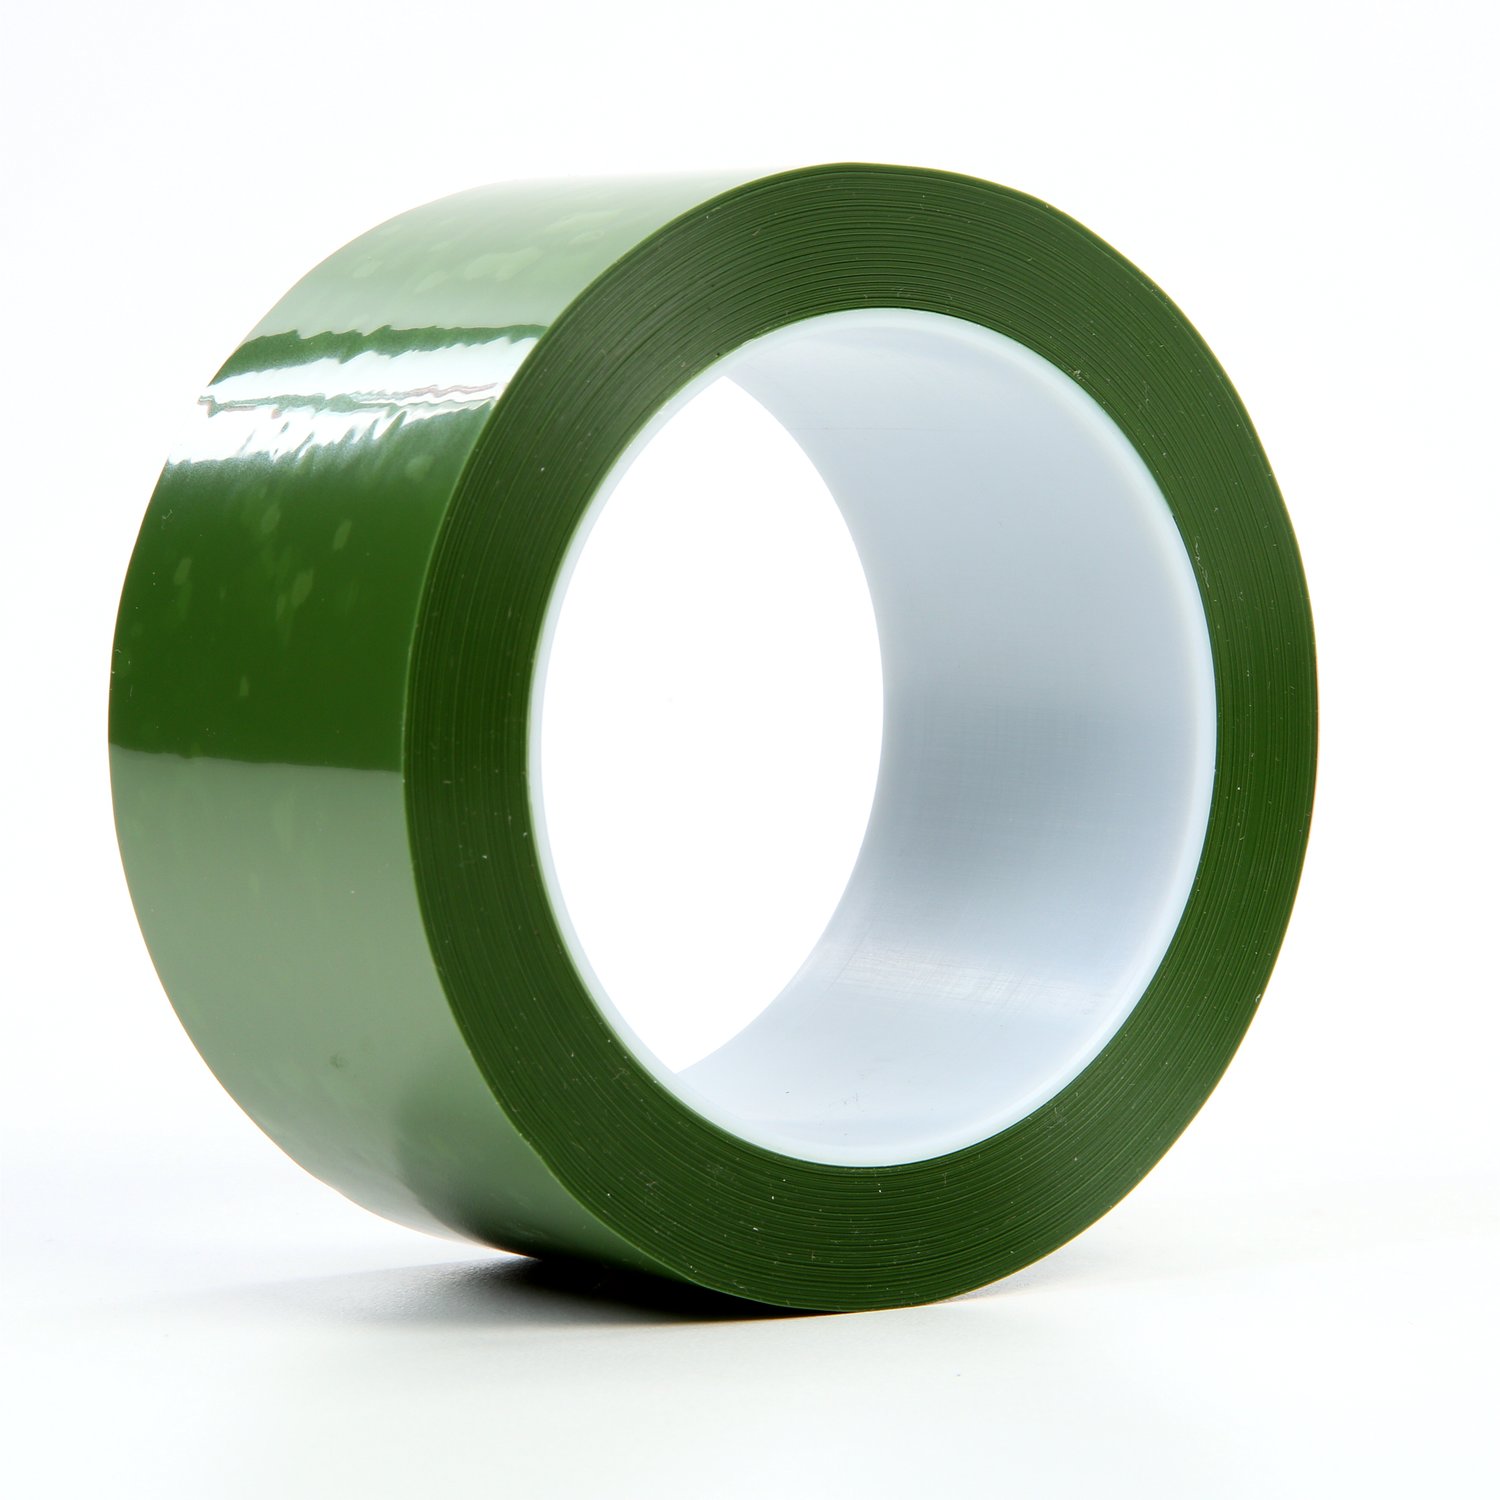 7000001173 - 3M Polyester Tape 8403, Green, 2 in x 72 yd, 2.4 mil, 24 rolls per case